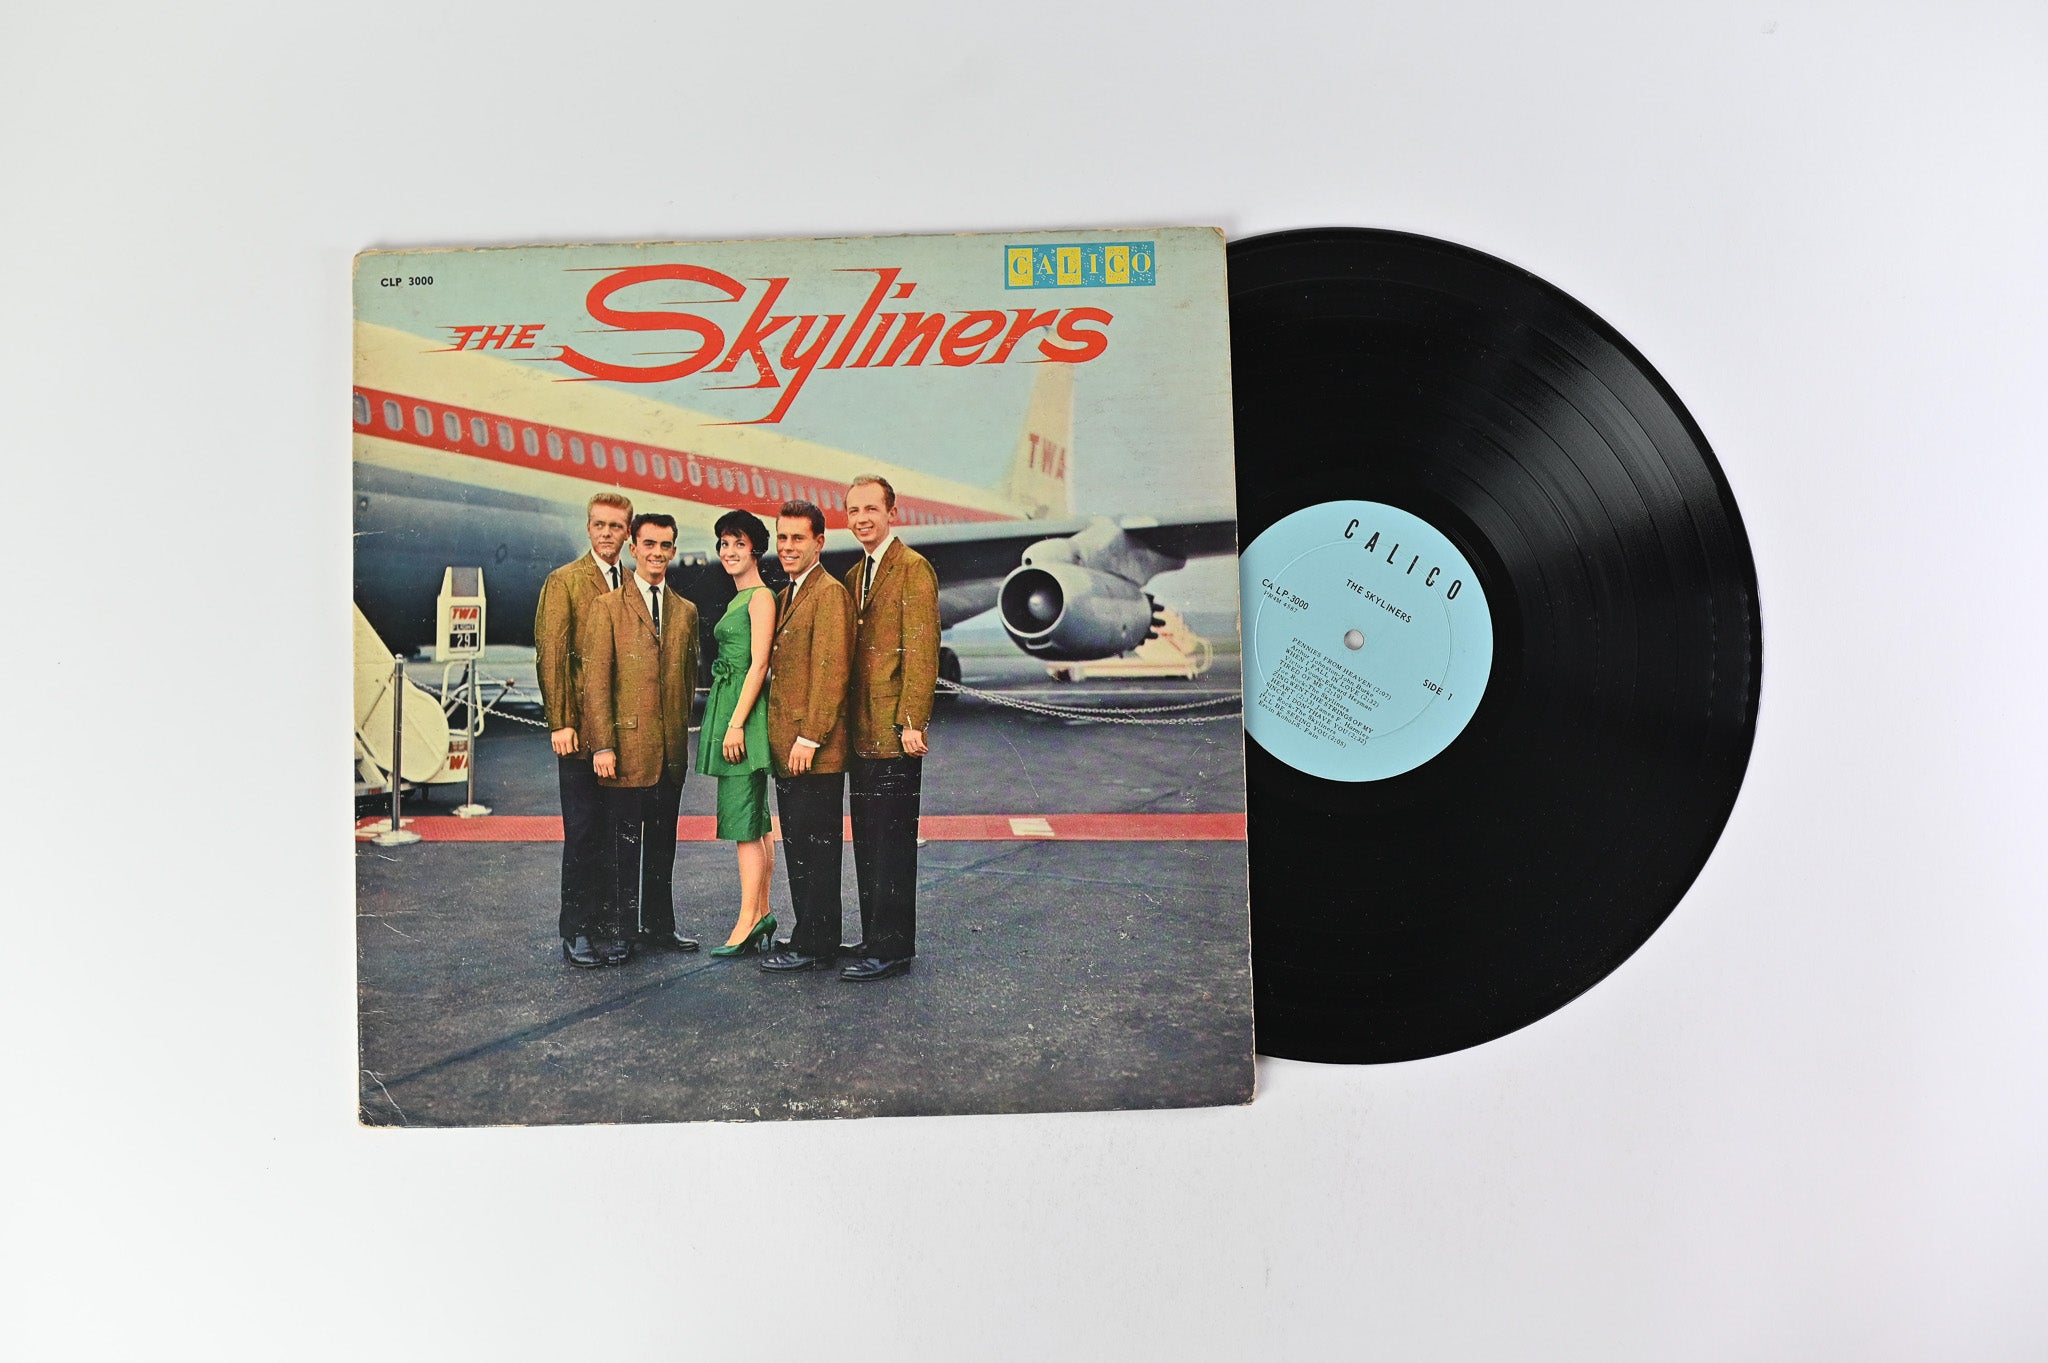 The Skyliners - The Skyliners on Calico - 1965 Mono pressing